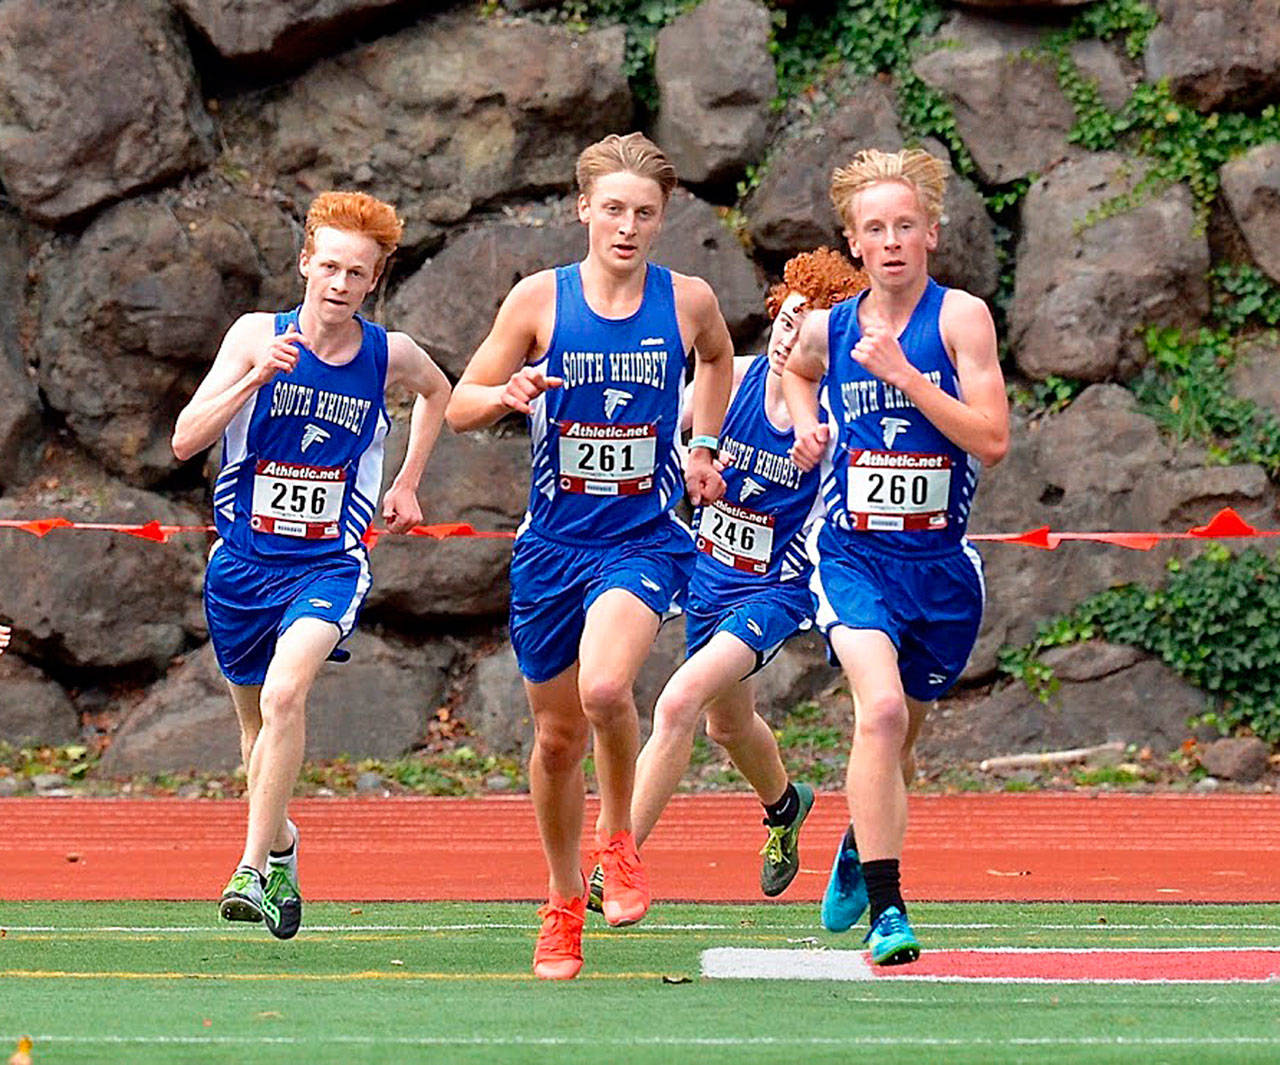 This year’s Falcon cross country team includes a strong group of seniors, including Reilly McVay, left, Cooper Ullmann, Aidan Donnelly and Thomas Simms, shown here competing in a meet in 2019. (Photo by Karen Swegler)